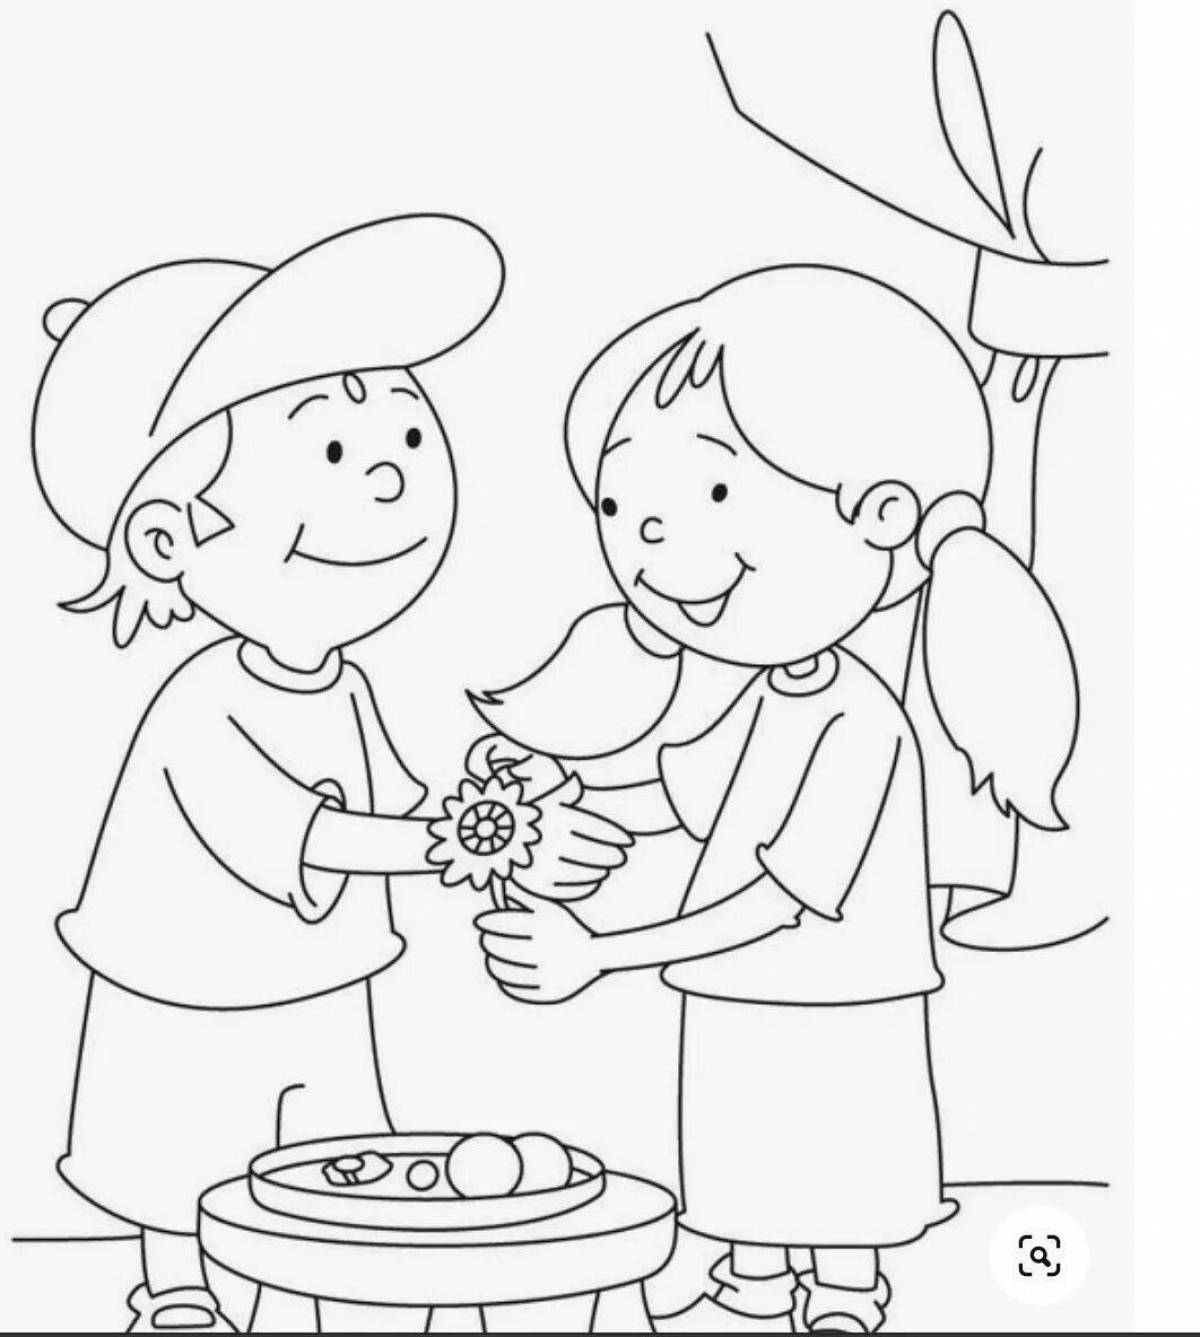 Brother and sister fun coloring book